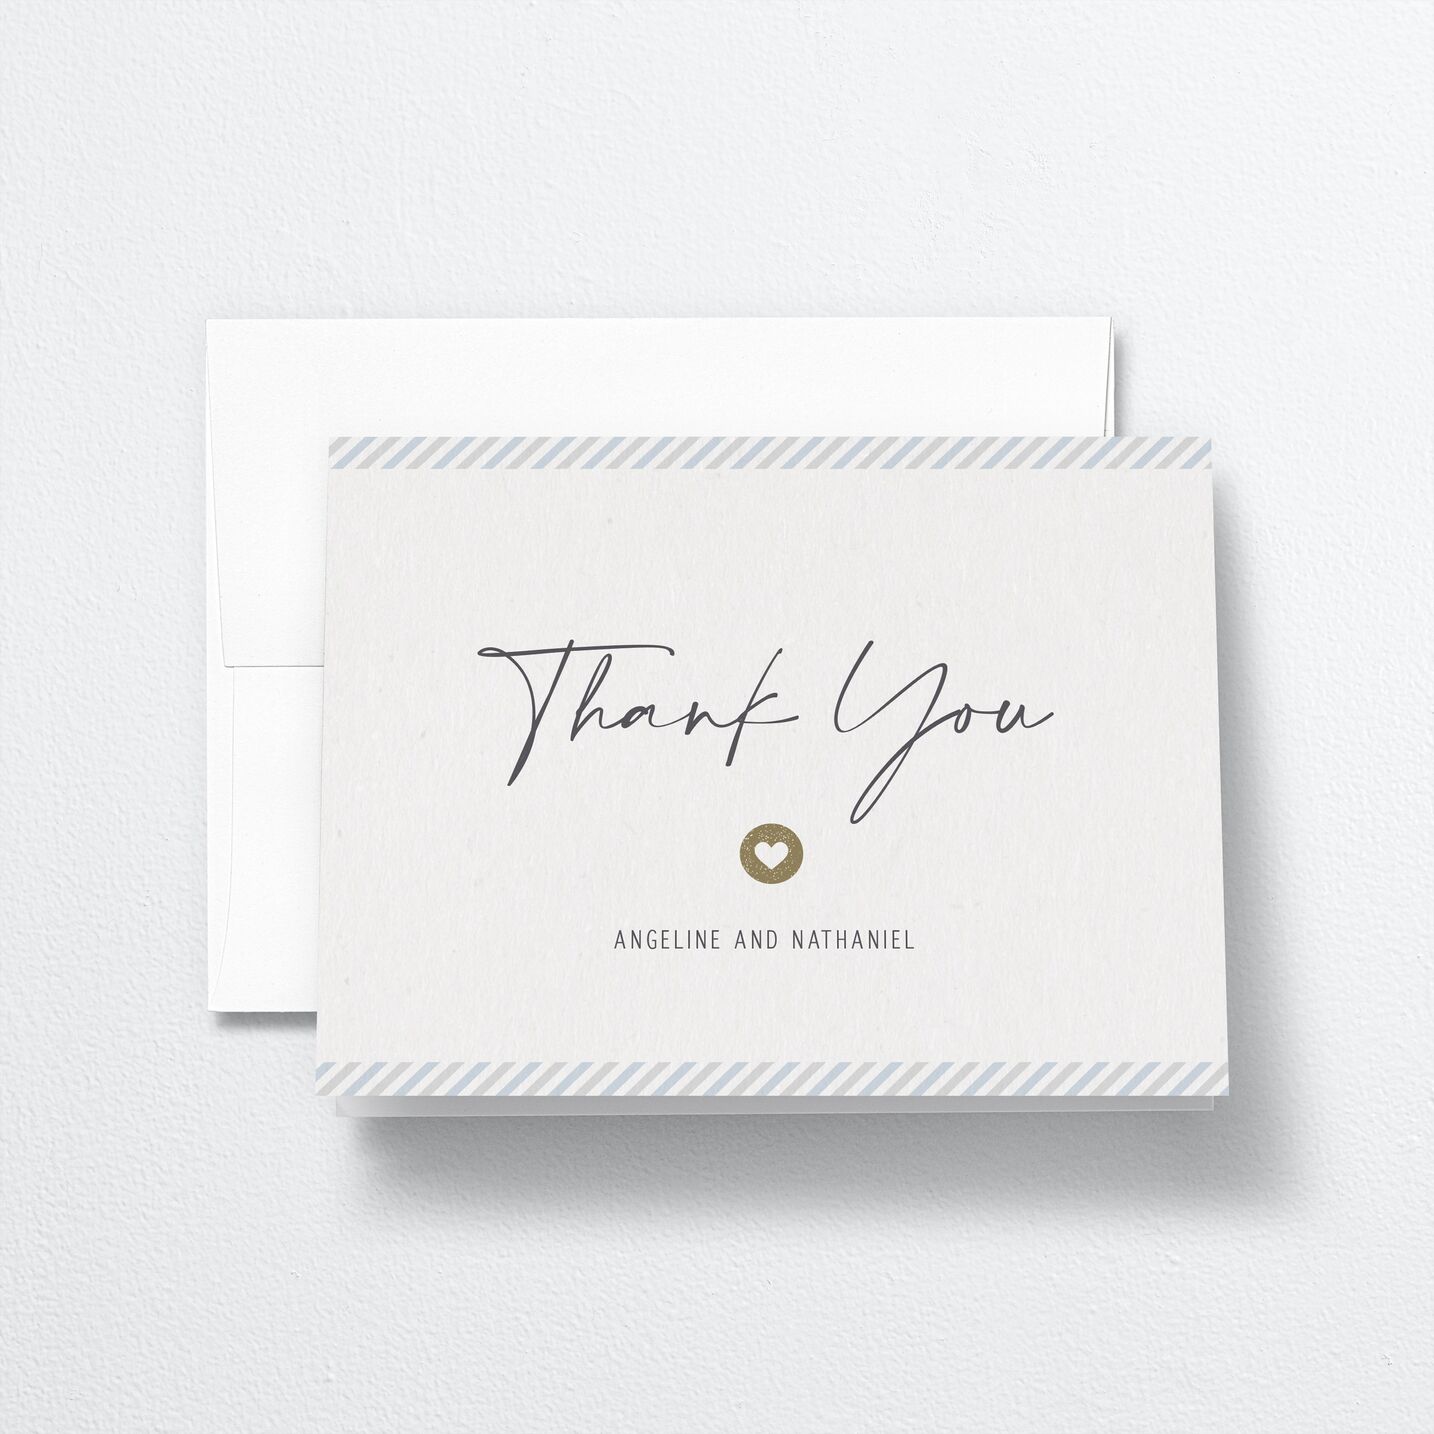 Vintage Boarding Pass Thank You Cards front in blue